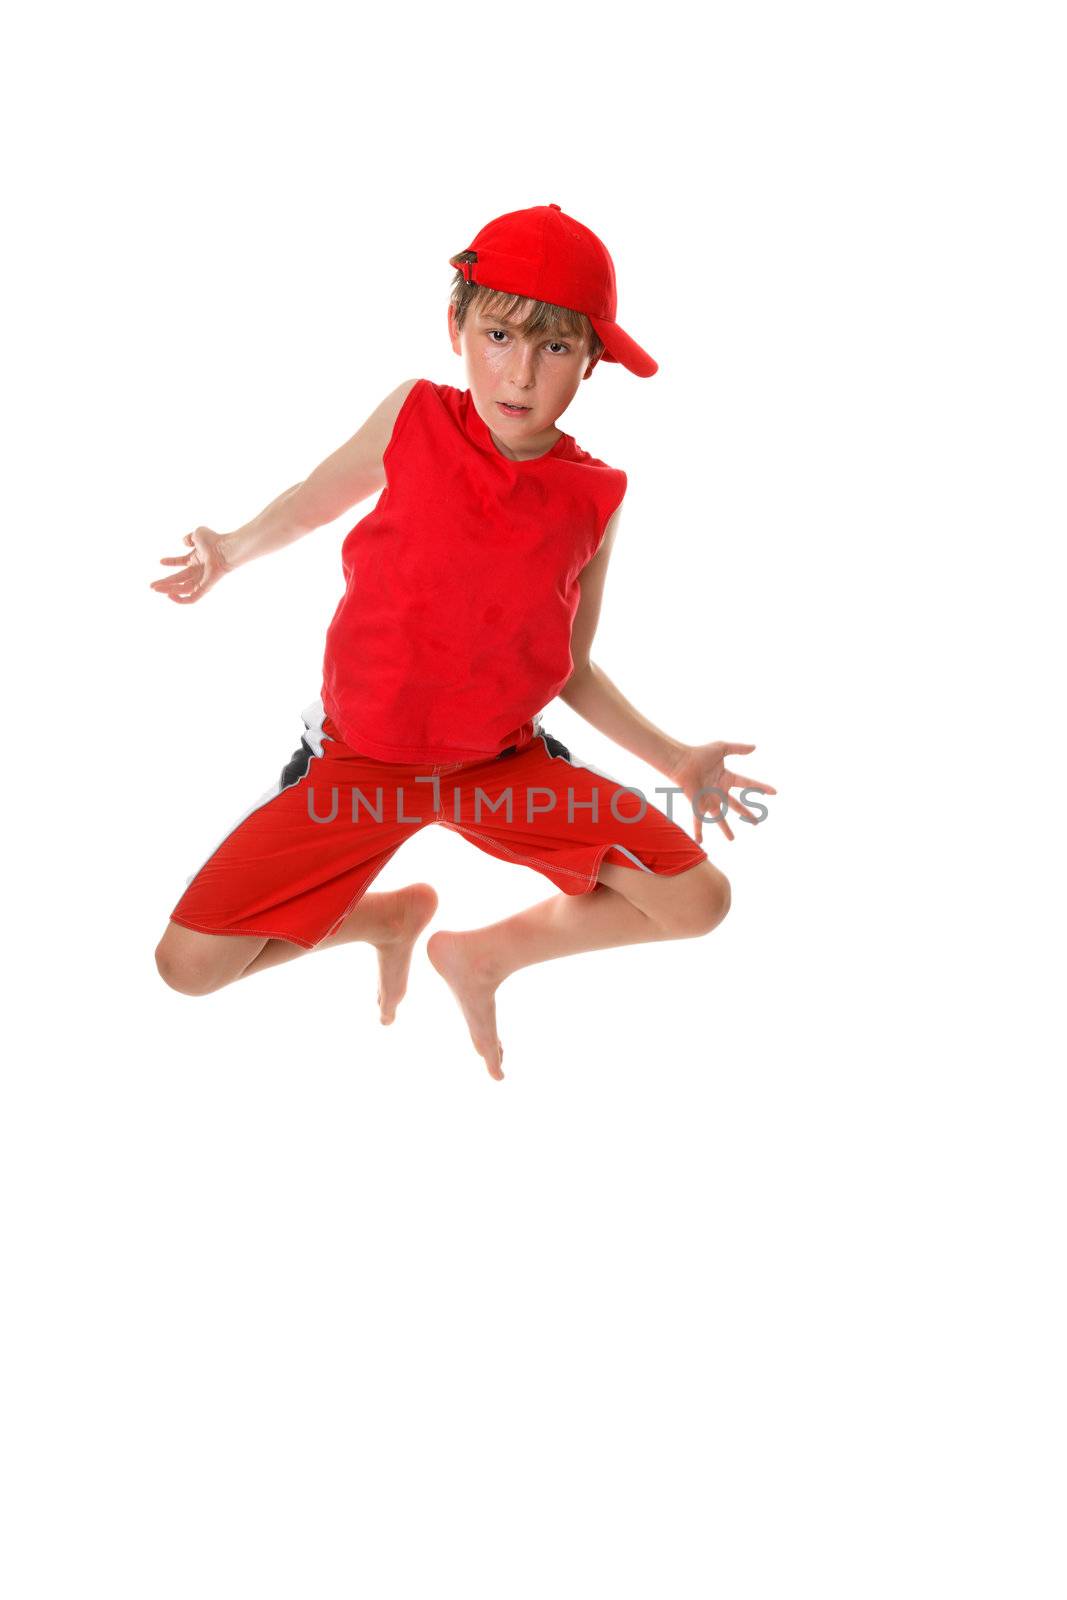 Child mid jump by lovleah